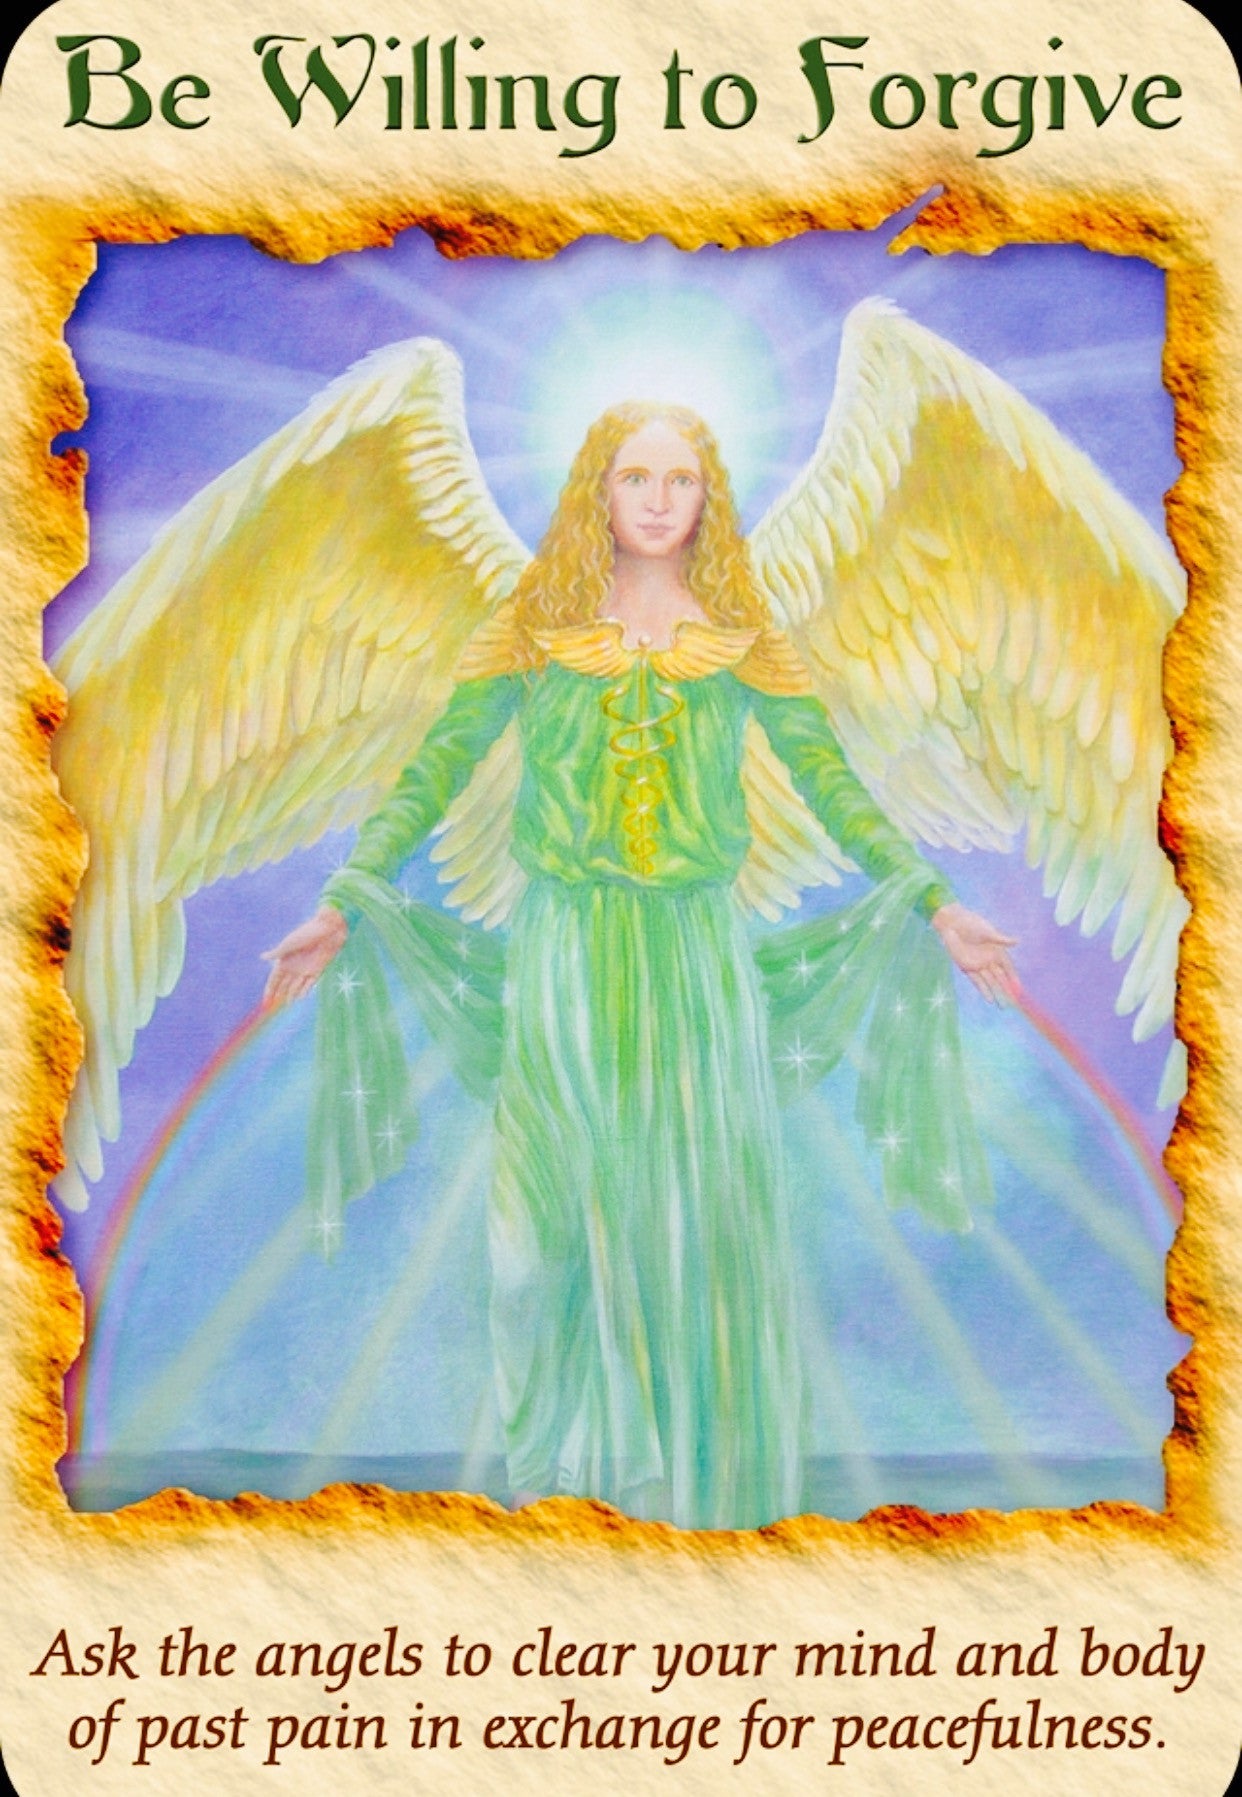 Archangel Raphael: Be Willing To Forgive: “Ask the angels to clear your mind and body of past pain in exchange for peacefulness.”